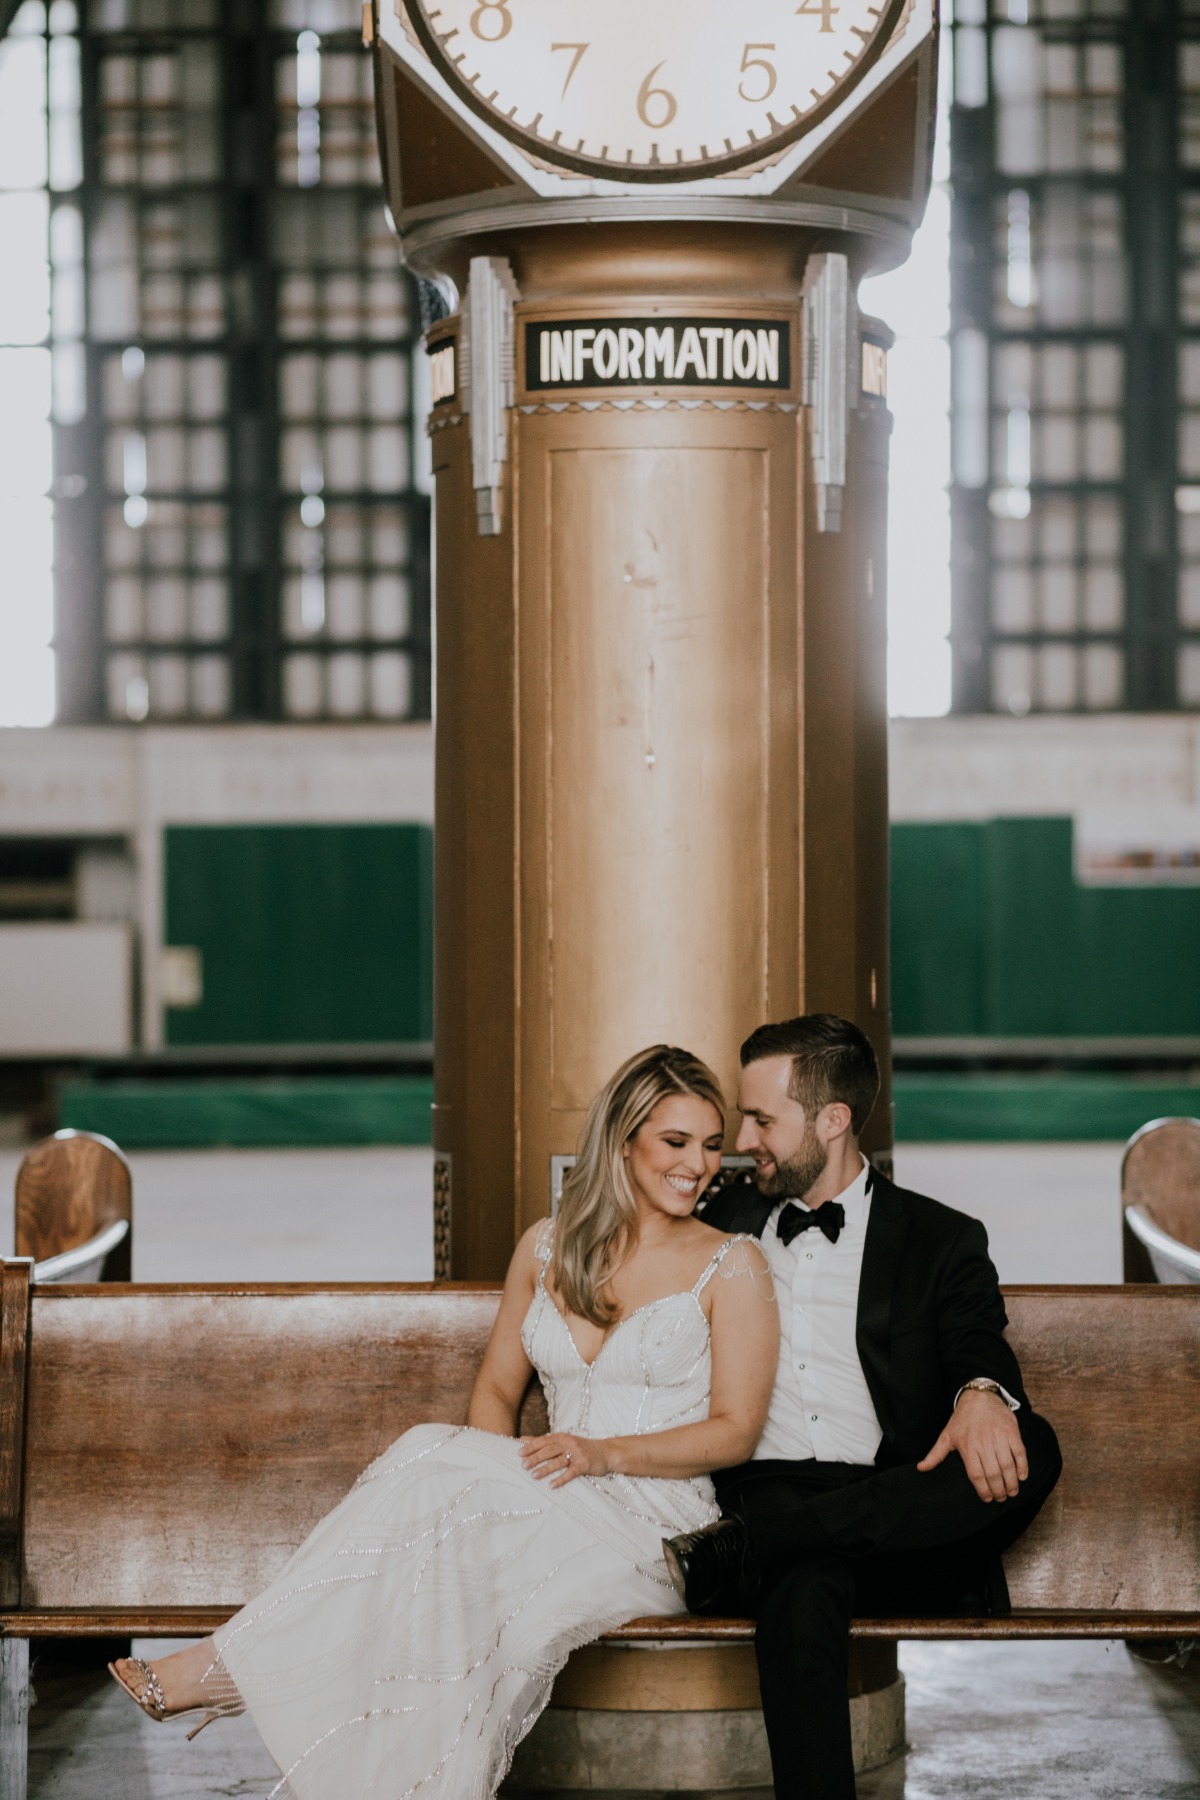 20s Inspired Glam Wedding In An Old Bank